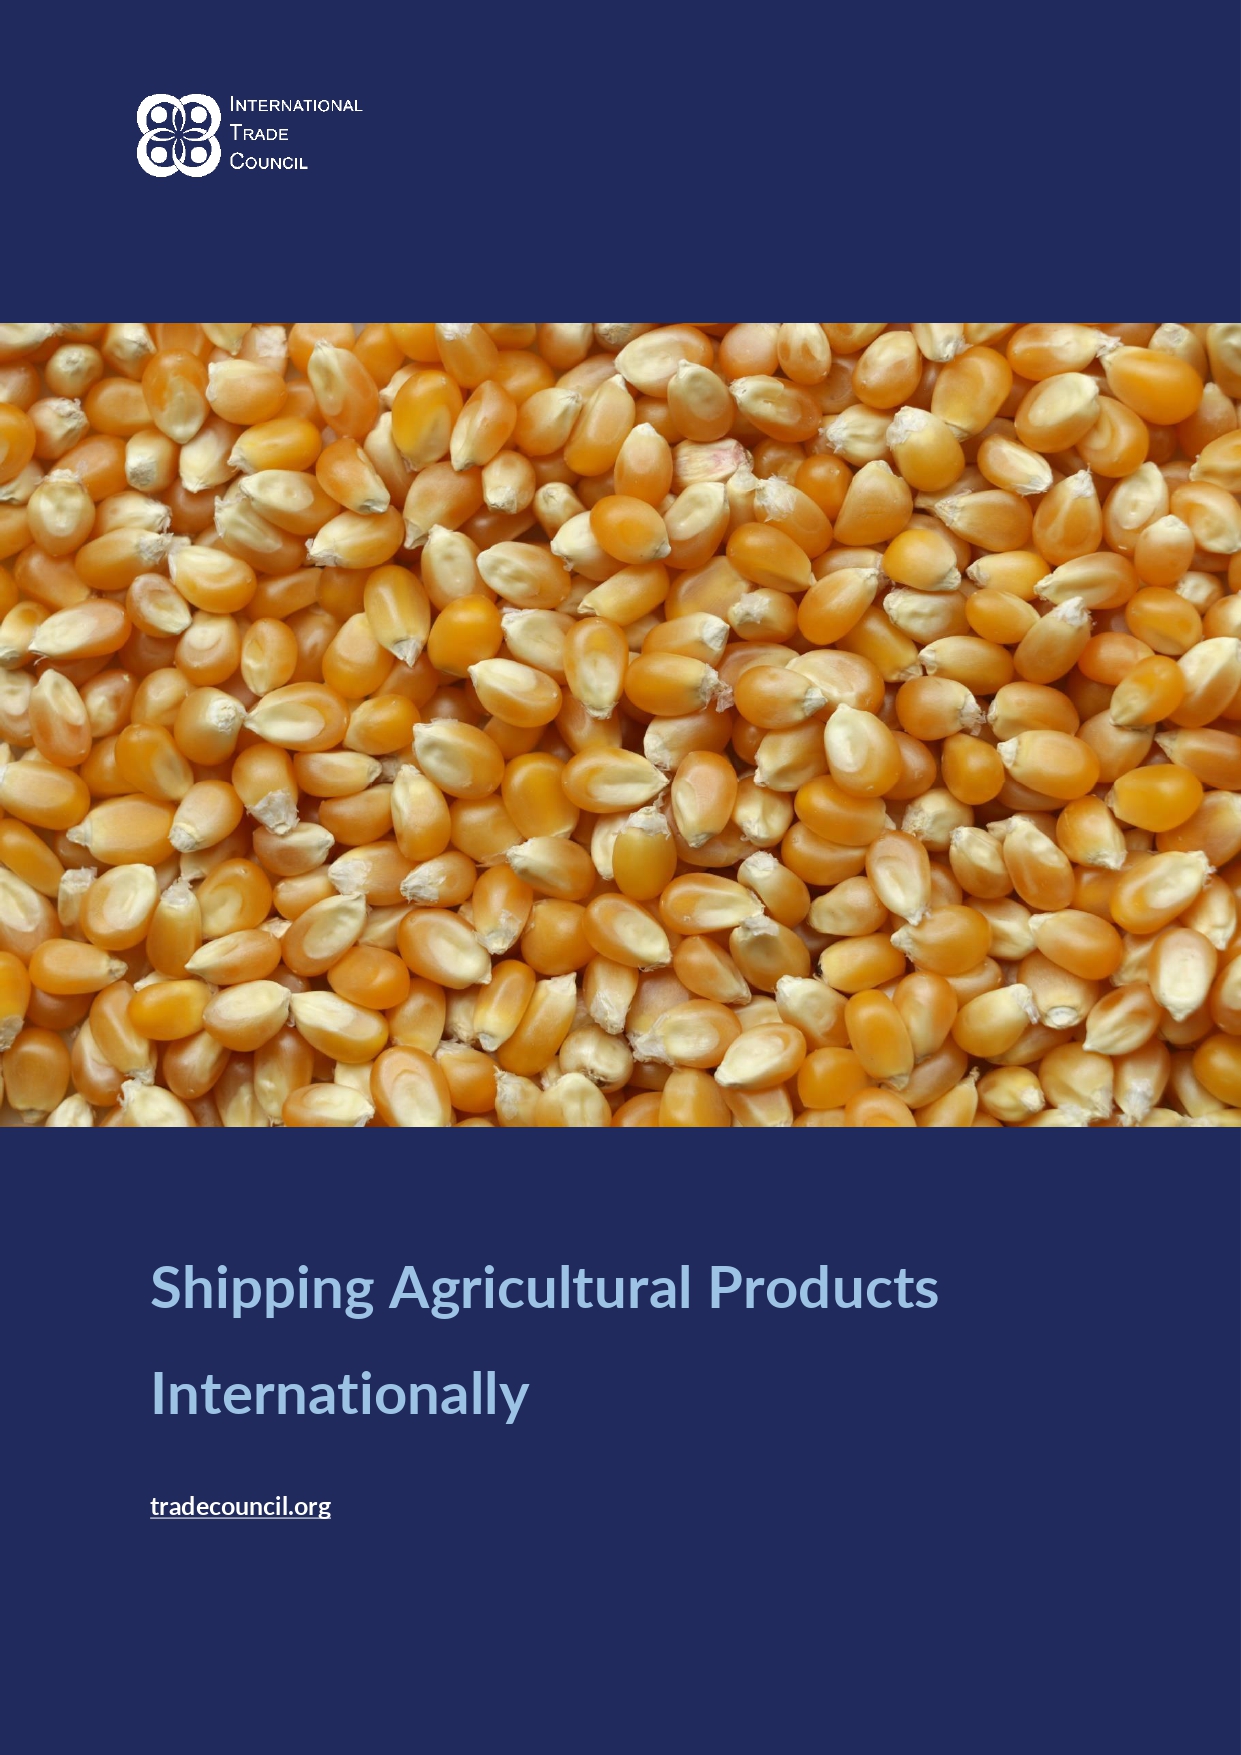 Shipping Agricultural Products Internationally from the International Trade Council your international chamber of commerce.